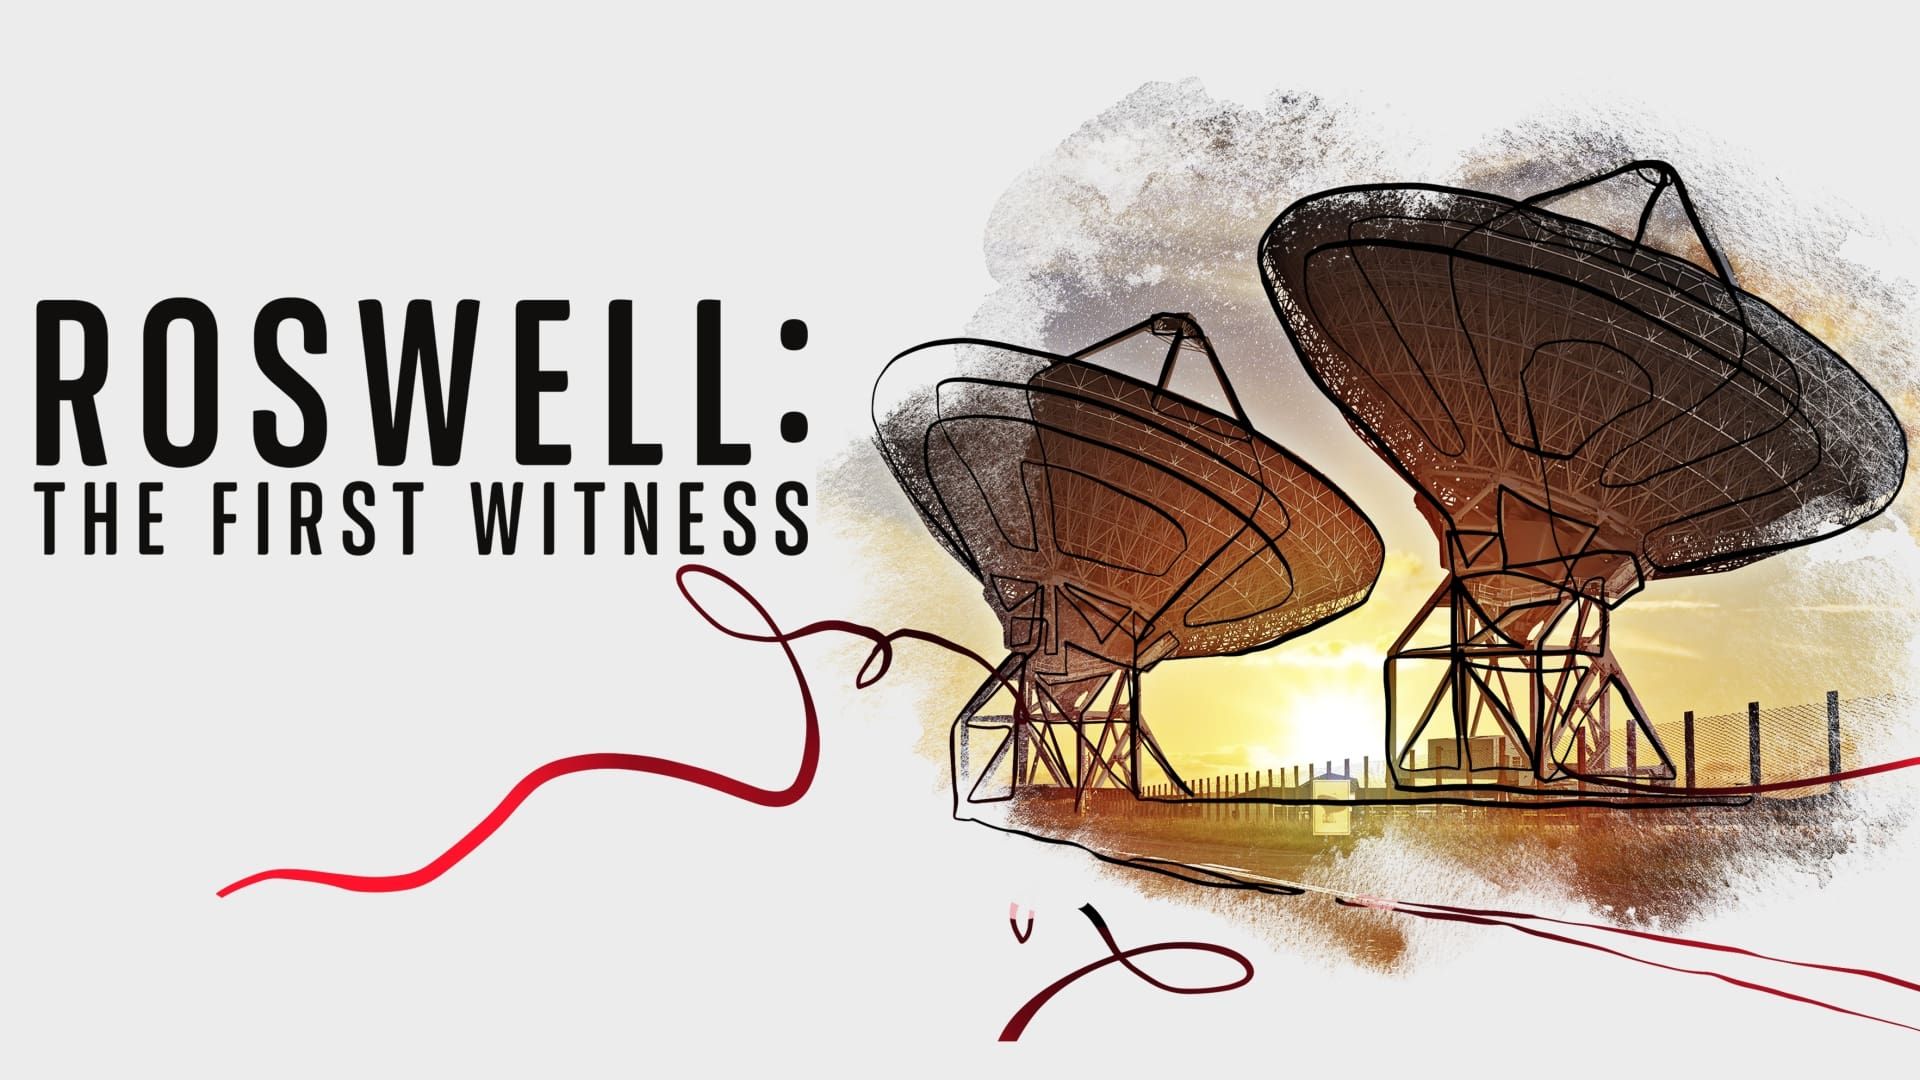 Roswell: The First Witness background